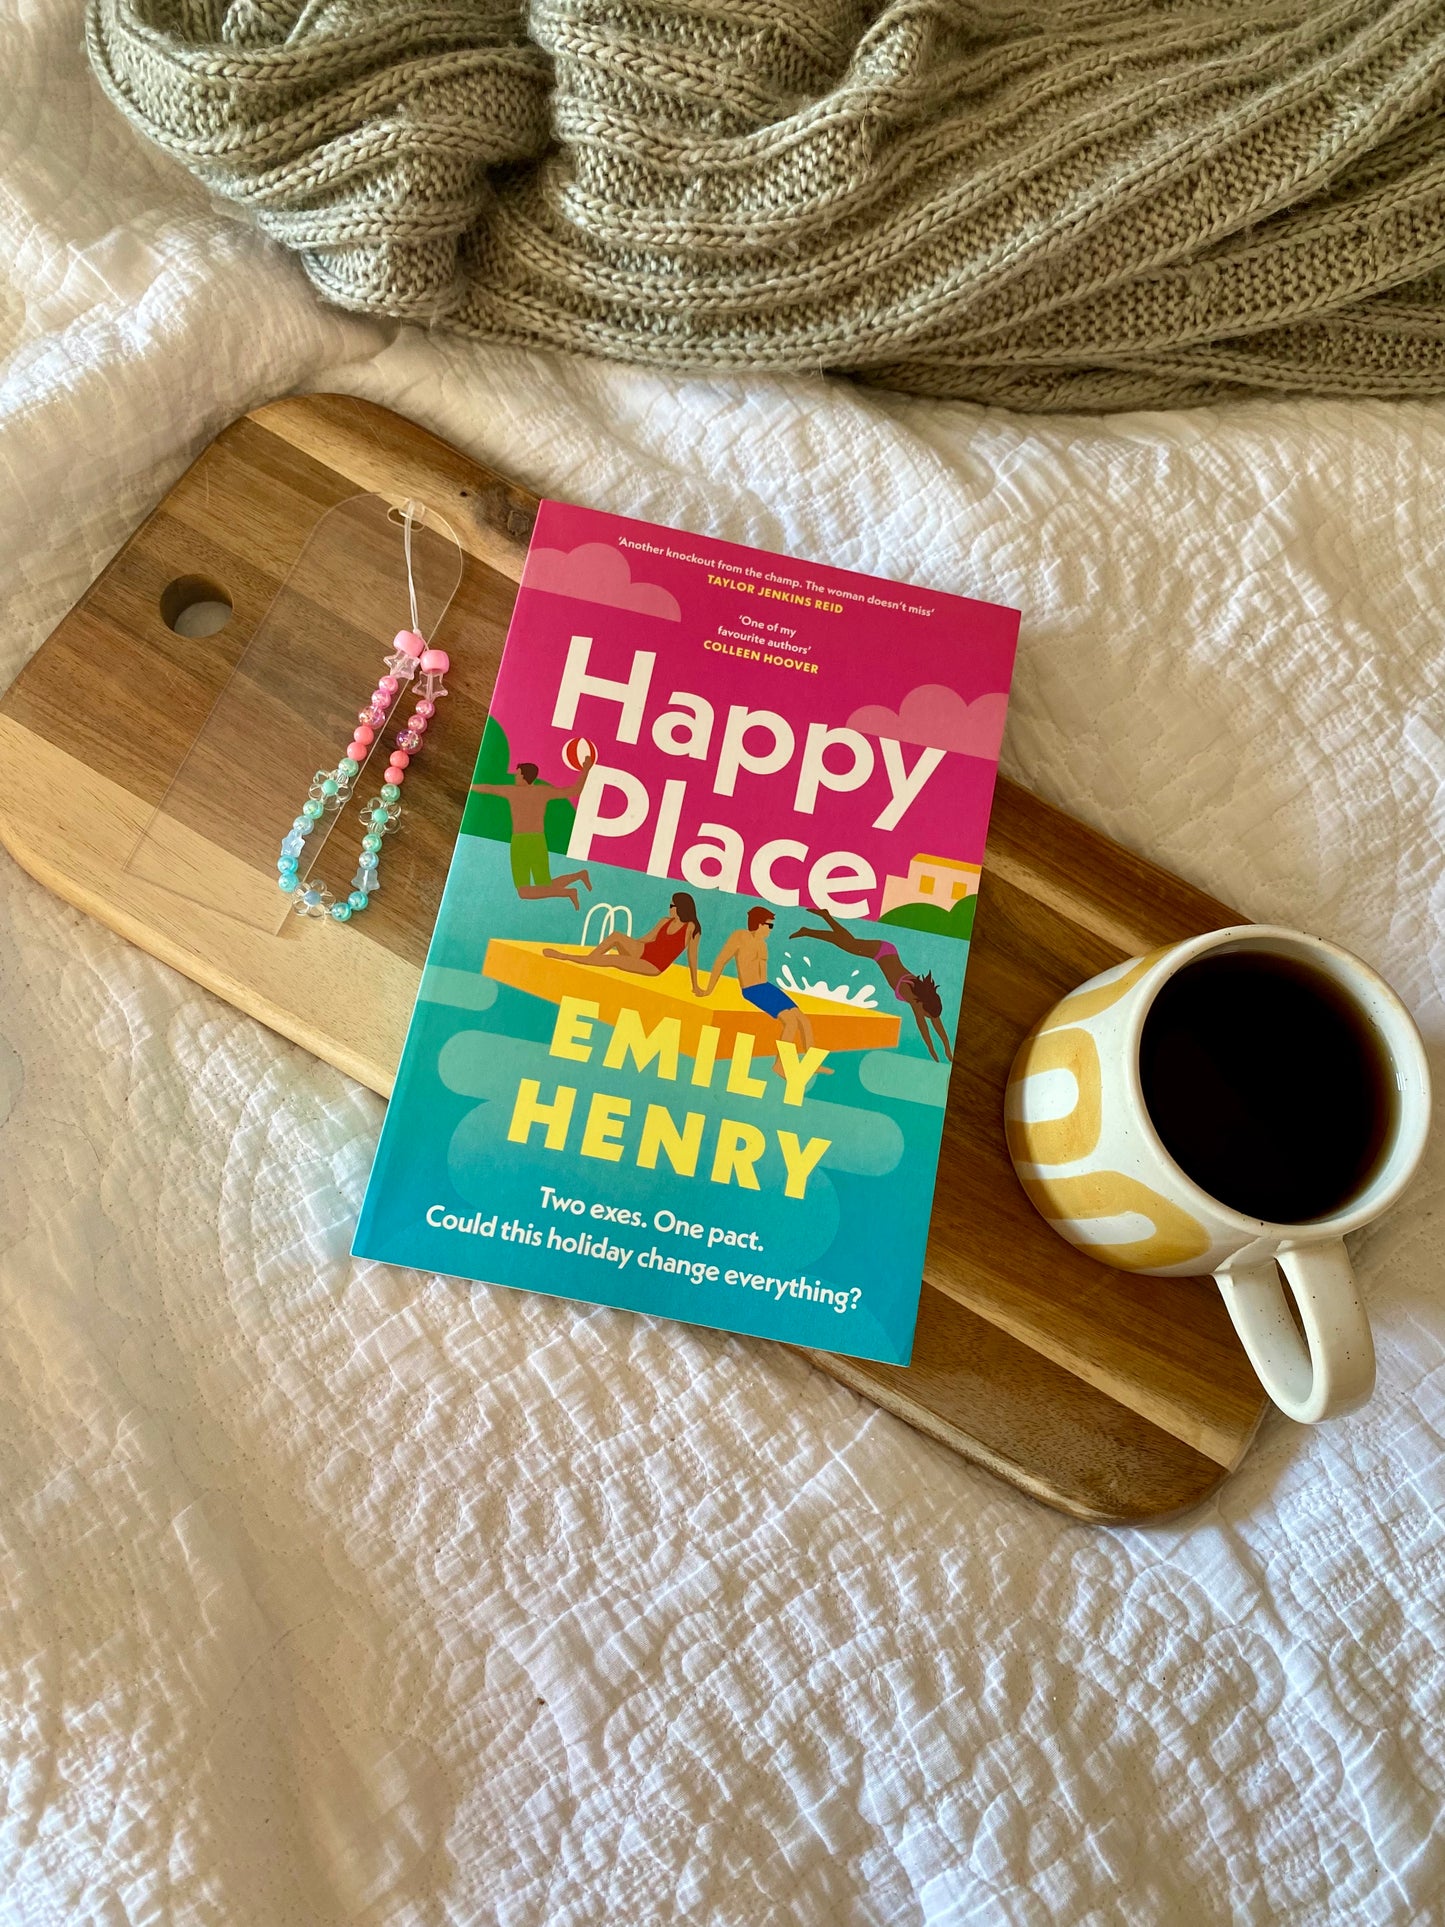 "Happy Place" inspired beaded bookmark charm